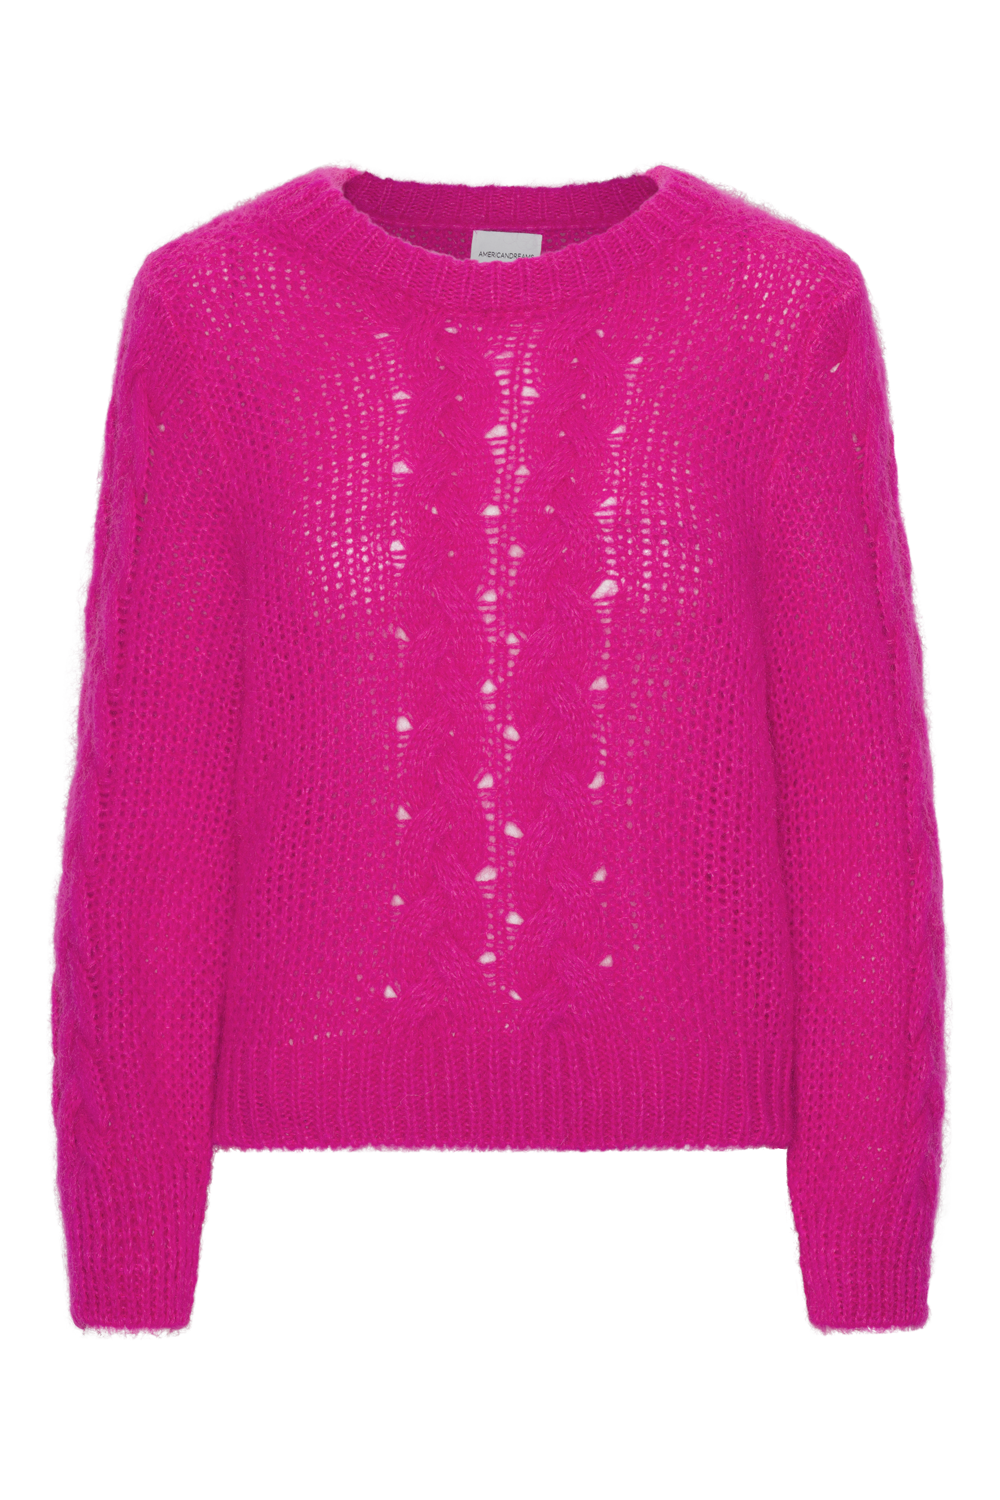 Louisa Cable Knit Pullover Neon Pink - Sample